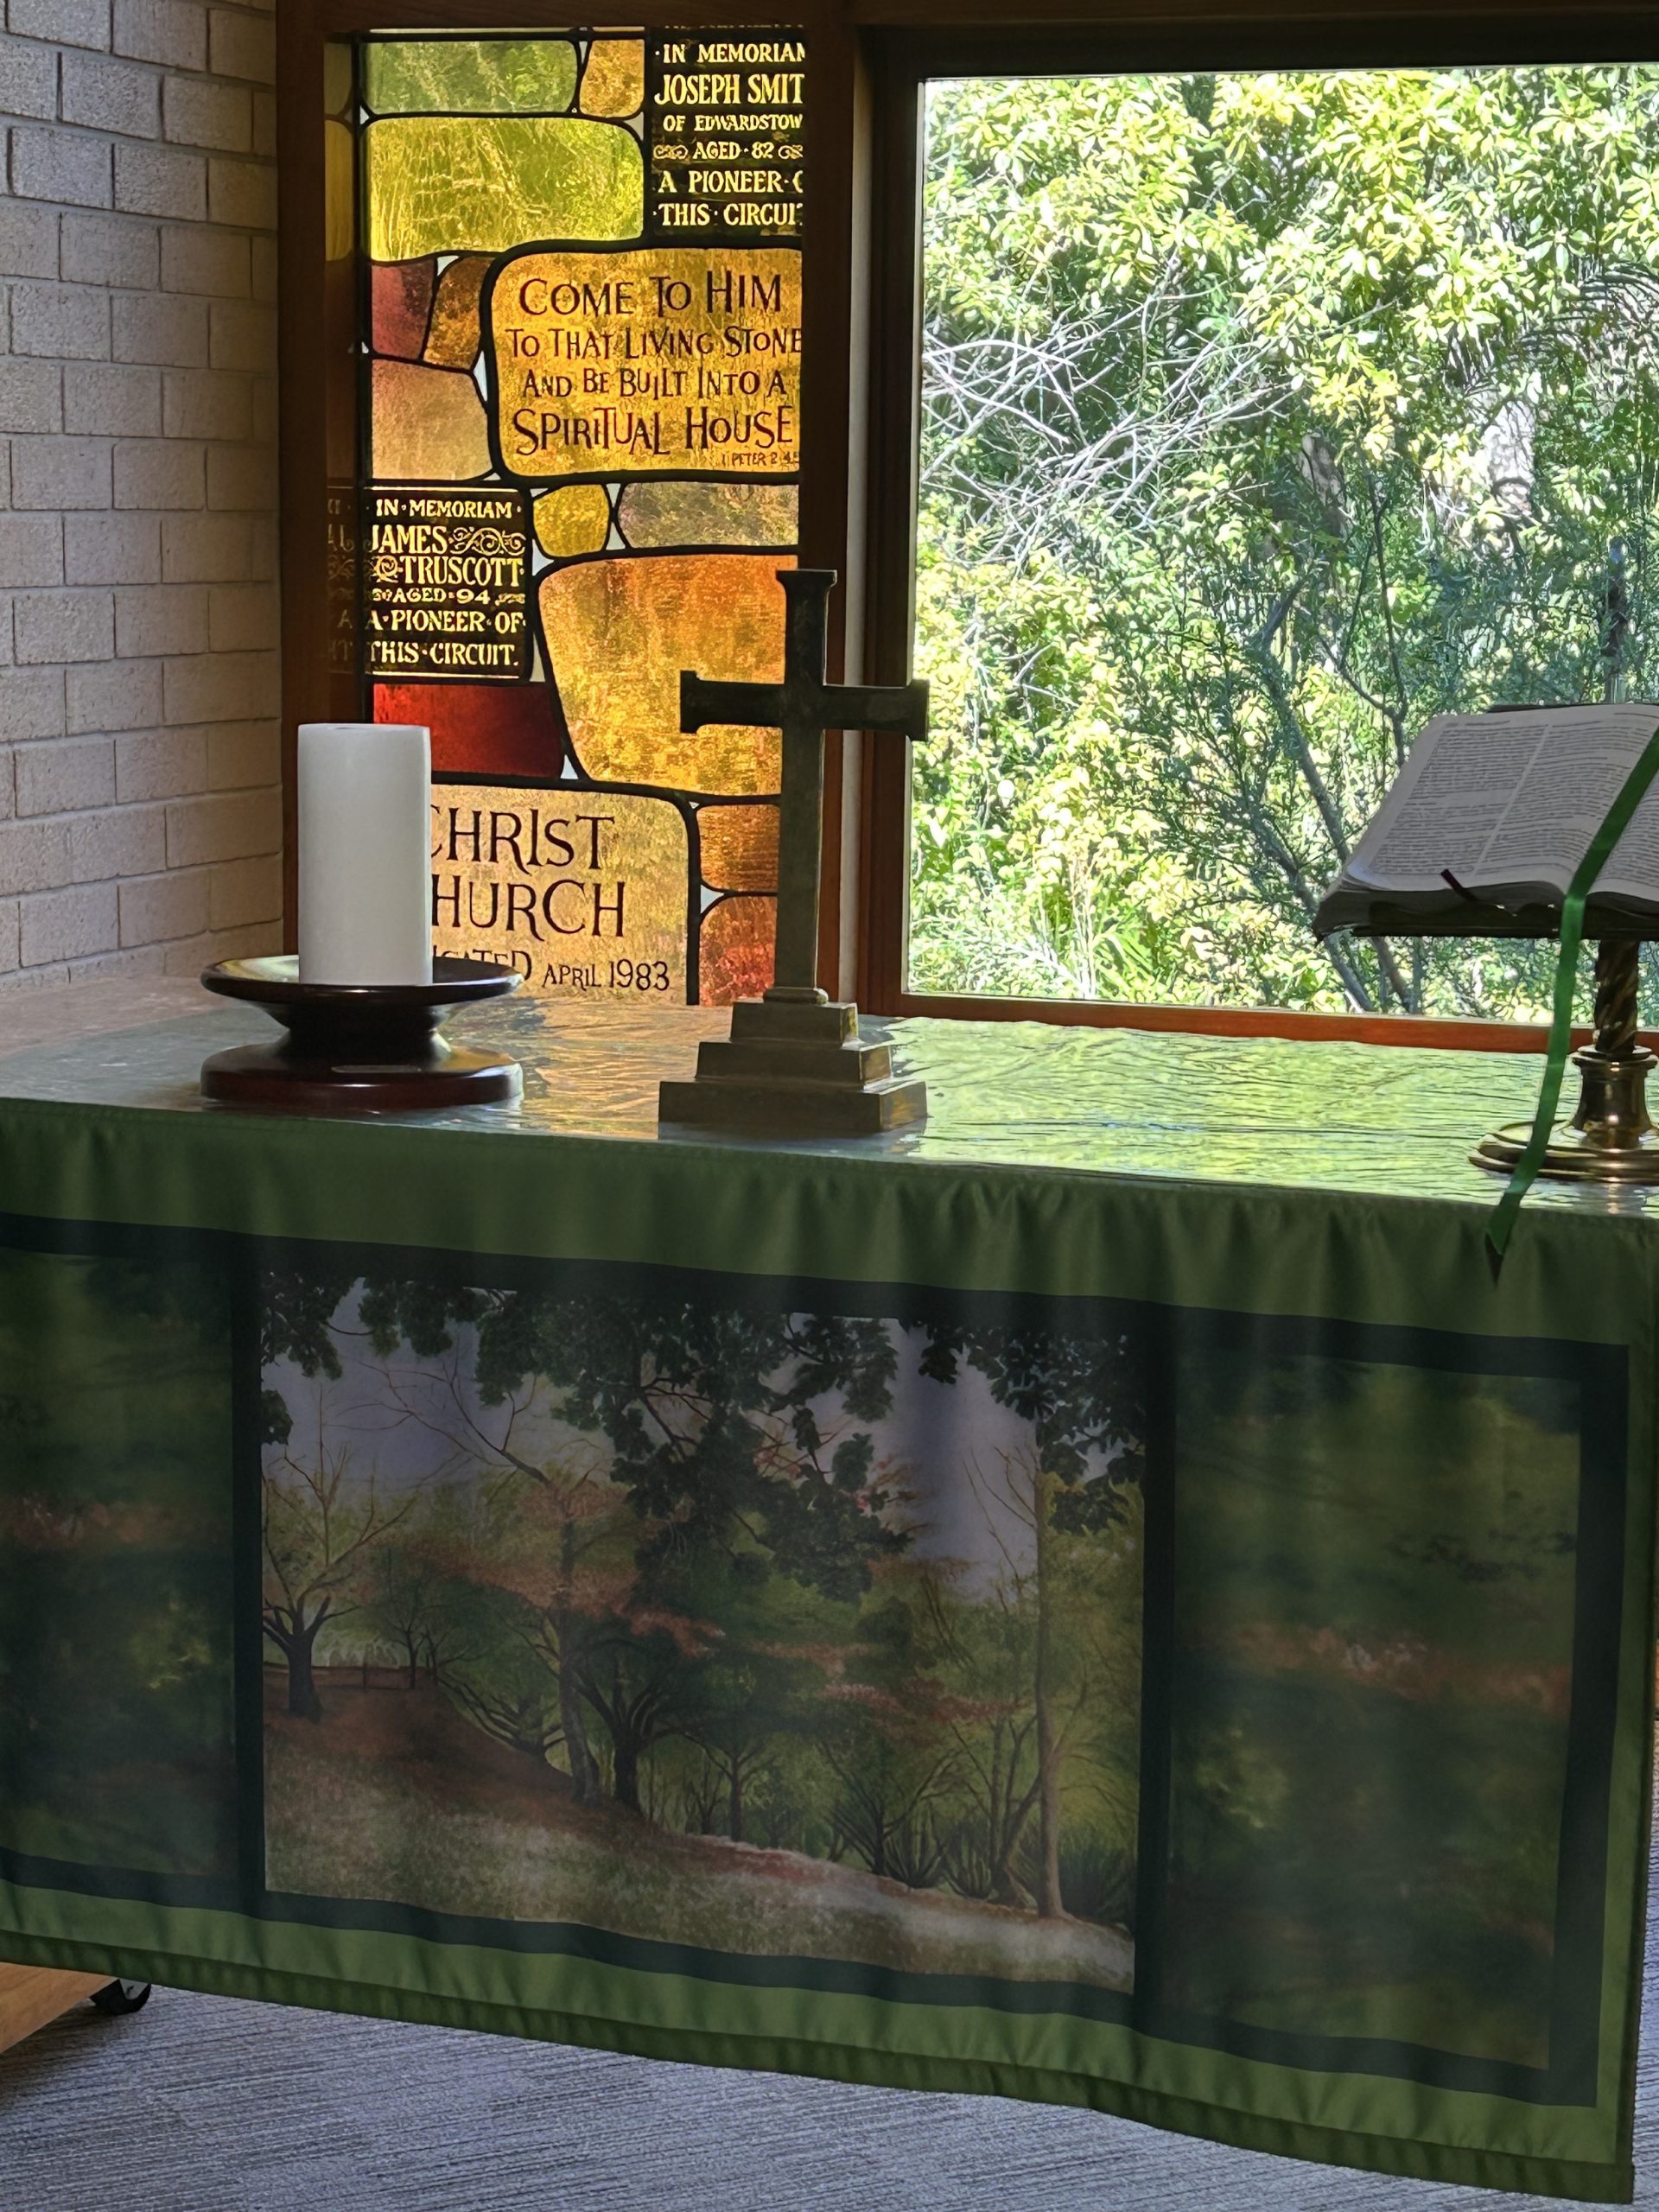 Communion Table, green cloth, gold cross, bible and white candle, in front of stained glass window with view to trees